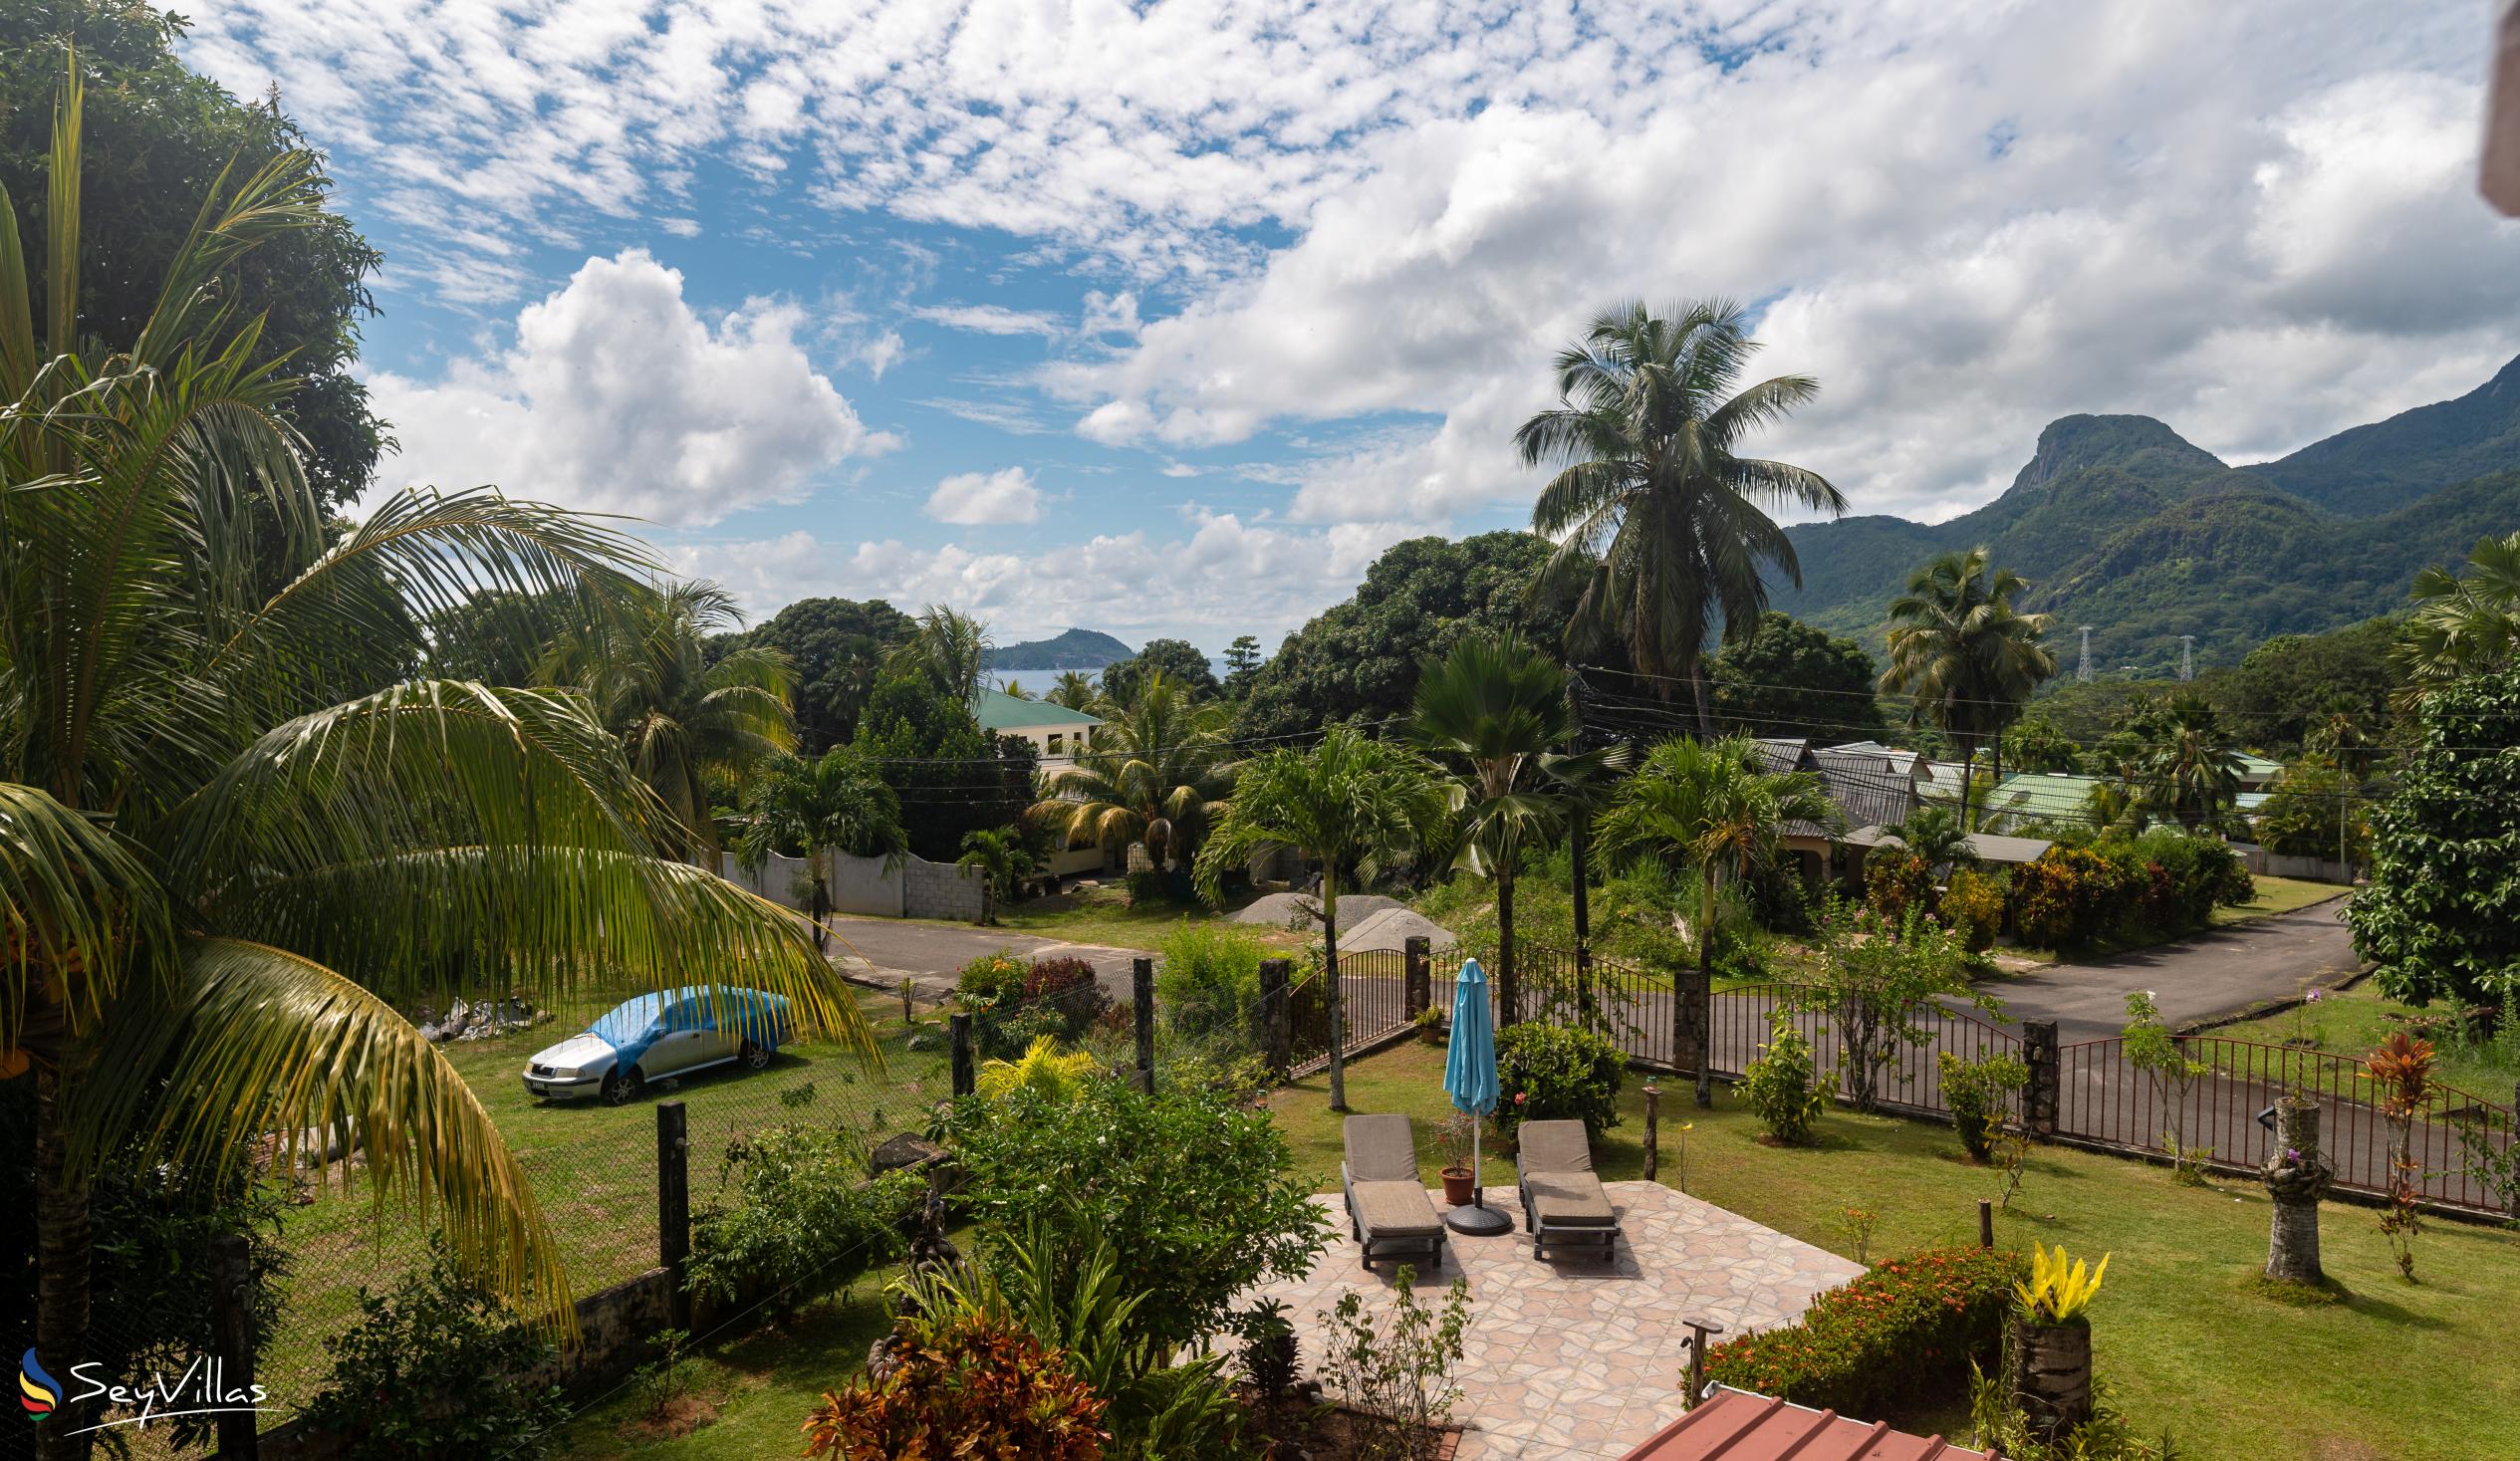 Foto 49: The Orchard Holiday Home - Lage - Mahé (Seychellen)